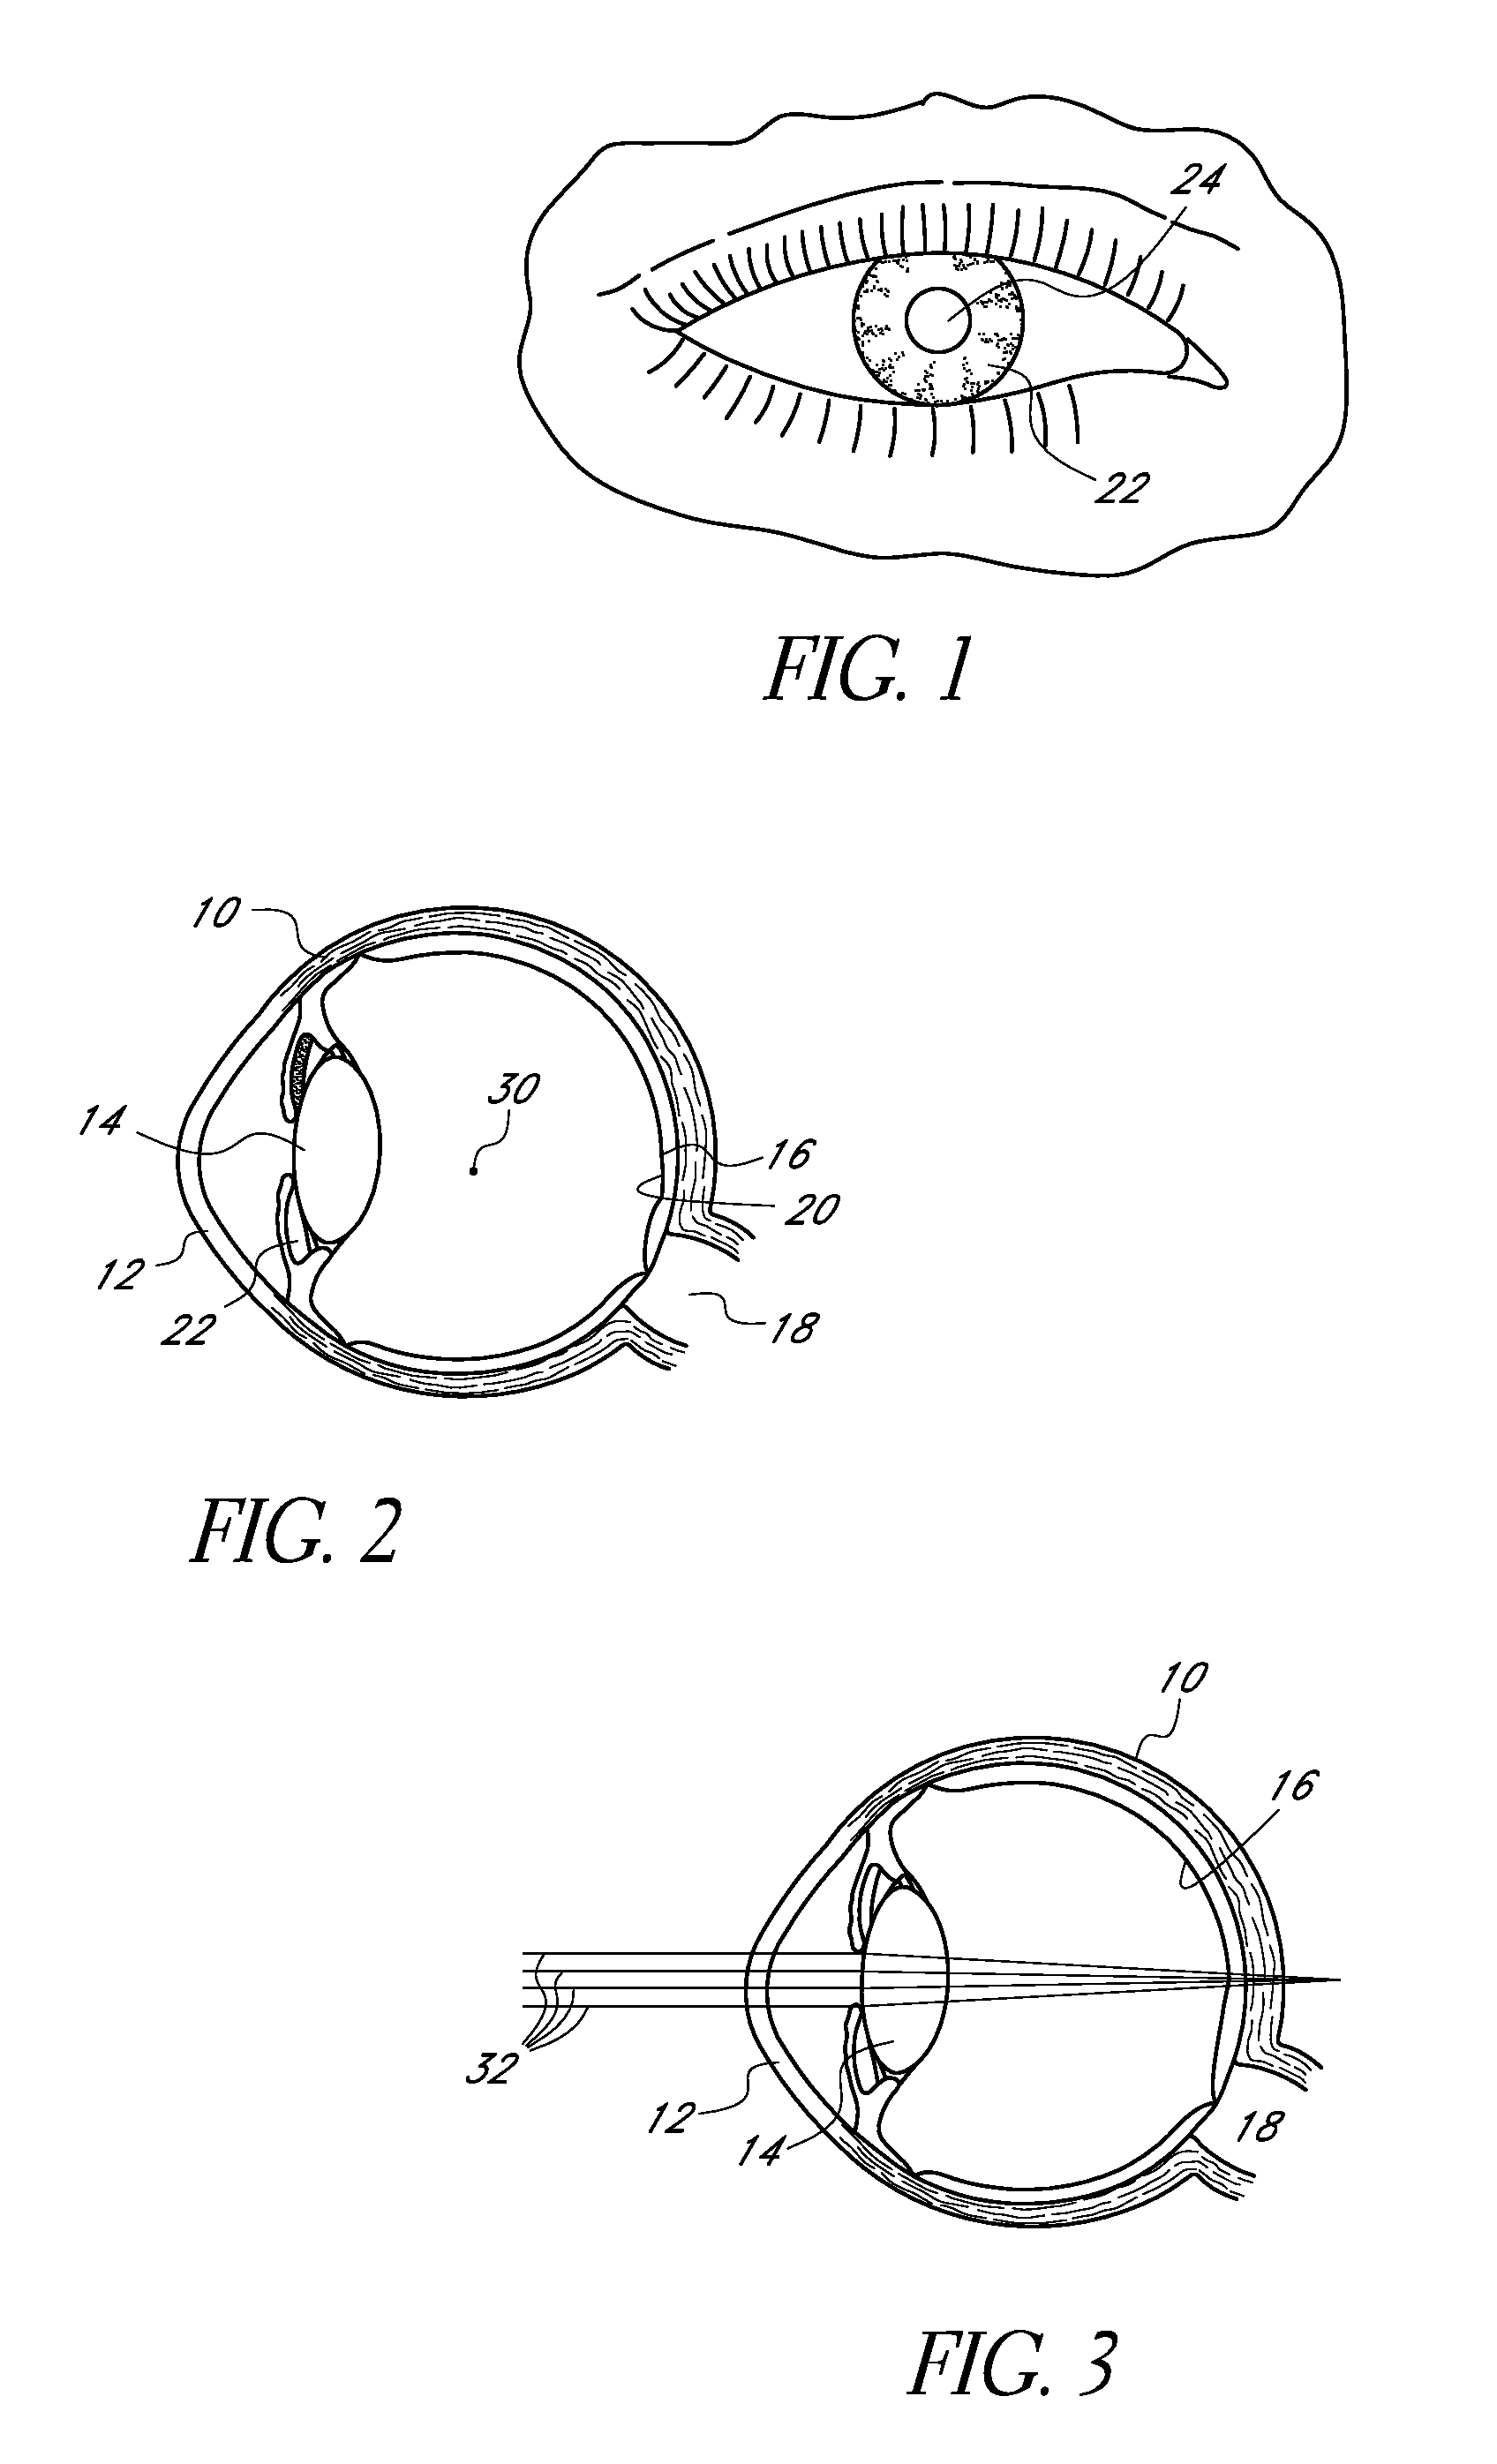 Corneal inlay with nutrient transport structures